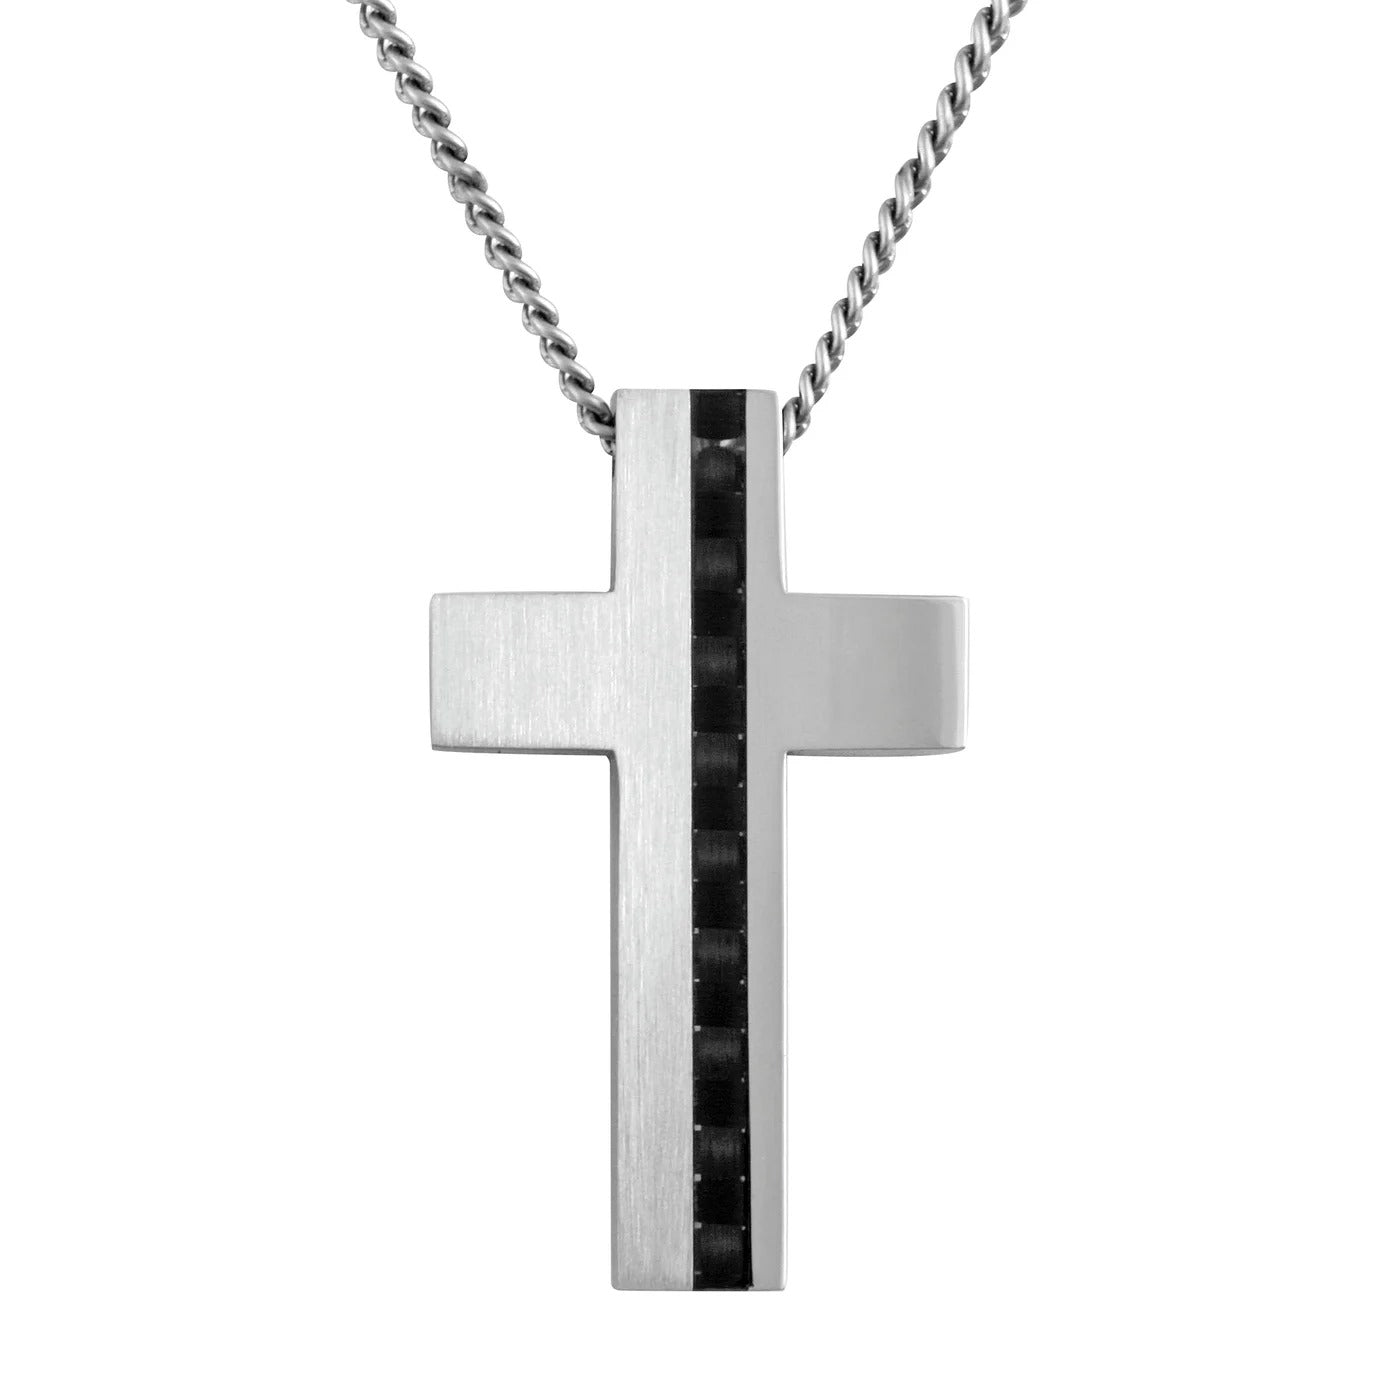 A men's stainless steel cross necklace with asymmetrical carbon fiber inlay displayed on a neutral white background.